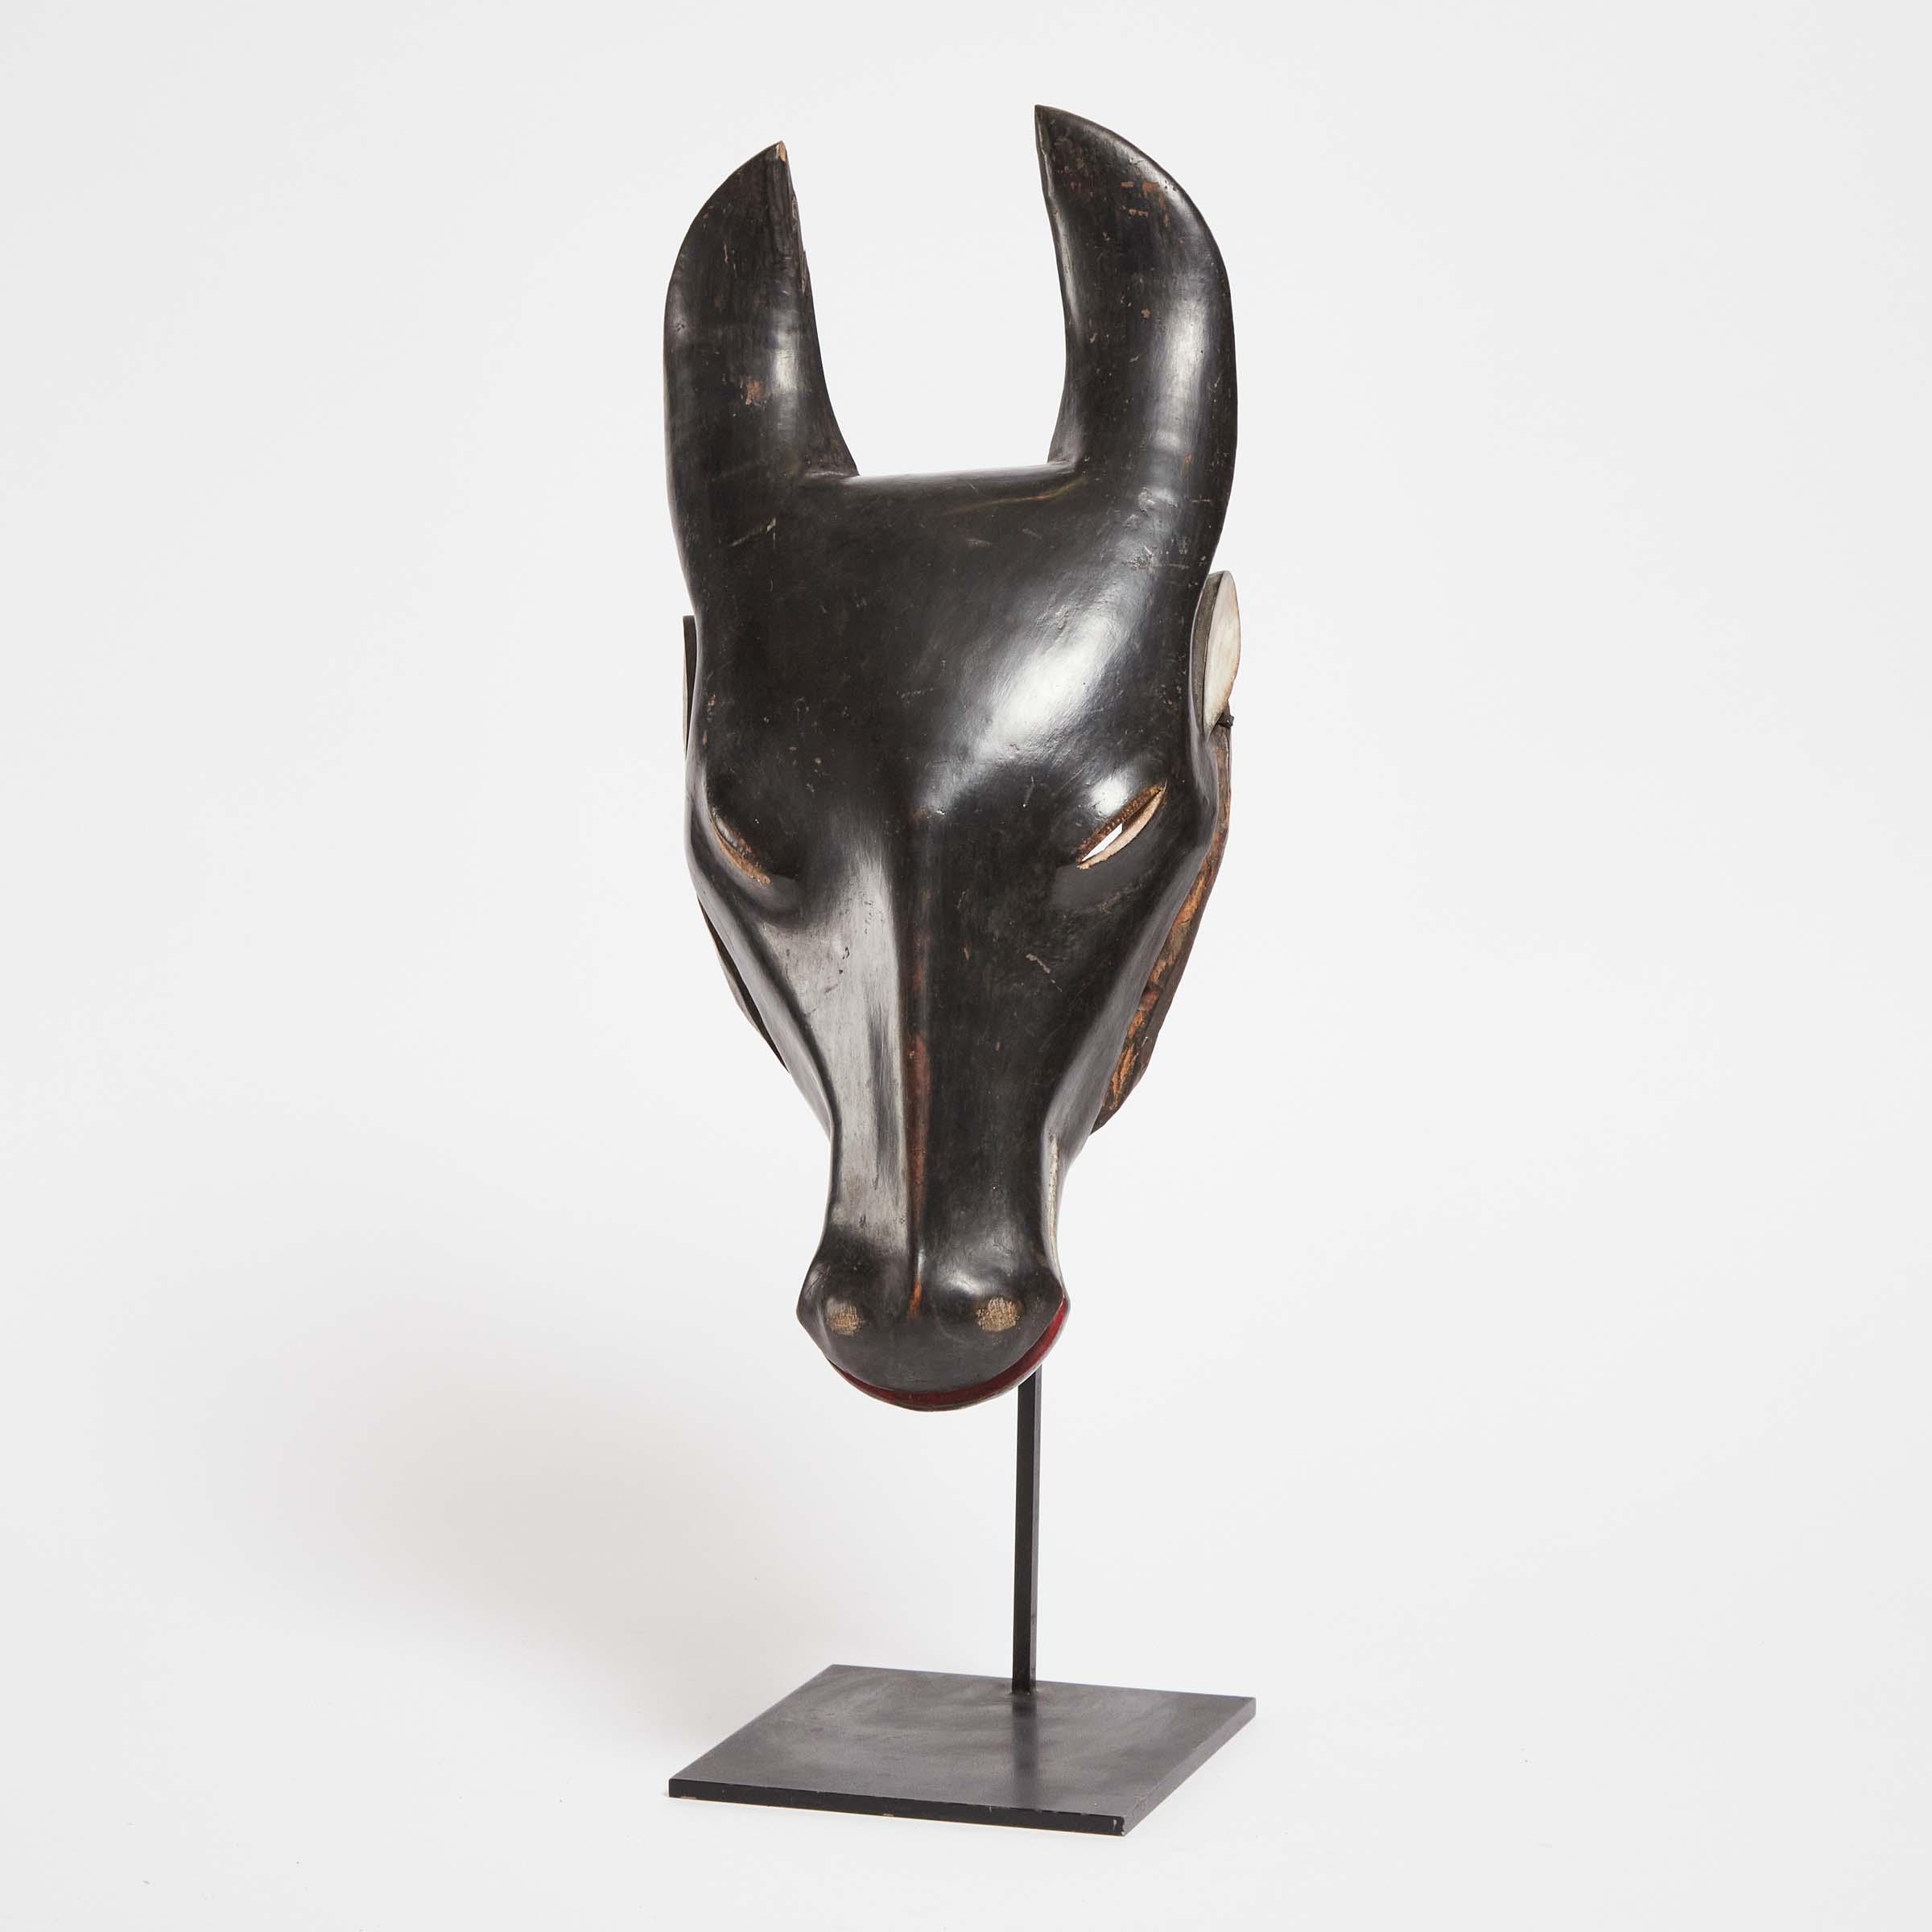 African Bush Cow Mask, possibly